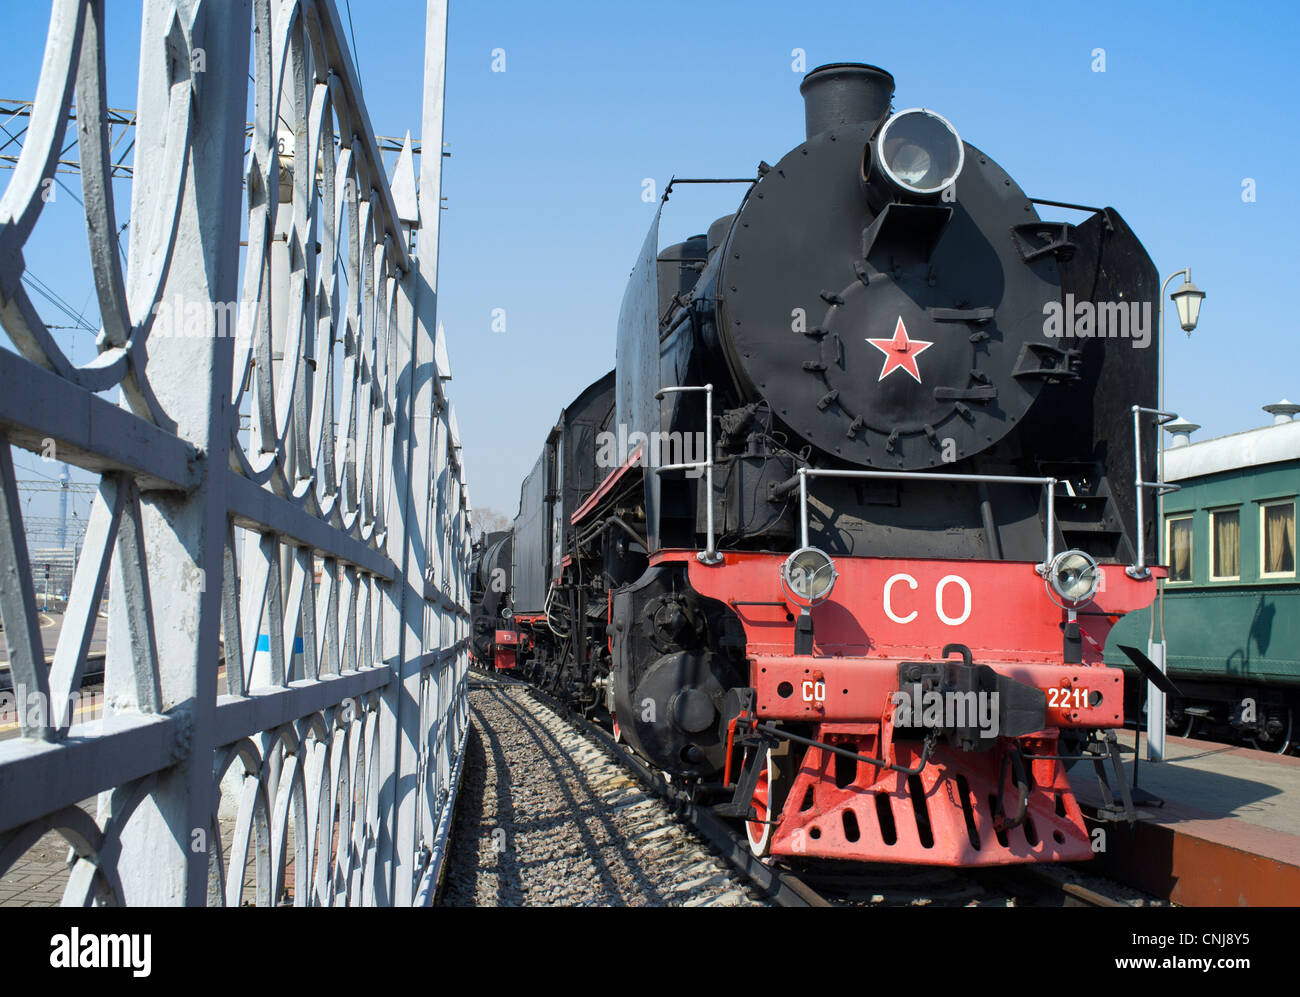 Russian steam locomotive SO017-2211. Built in1947 Stock Photo